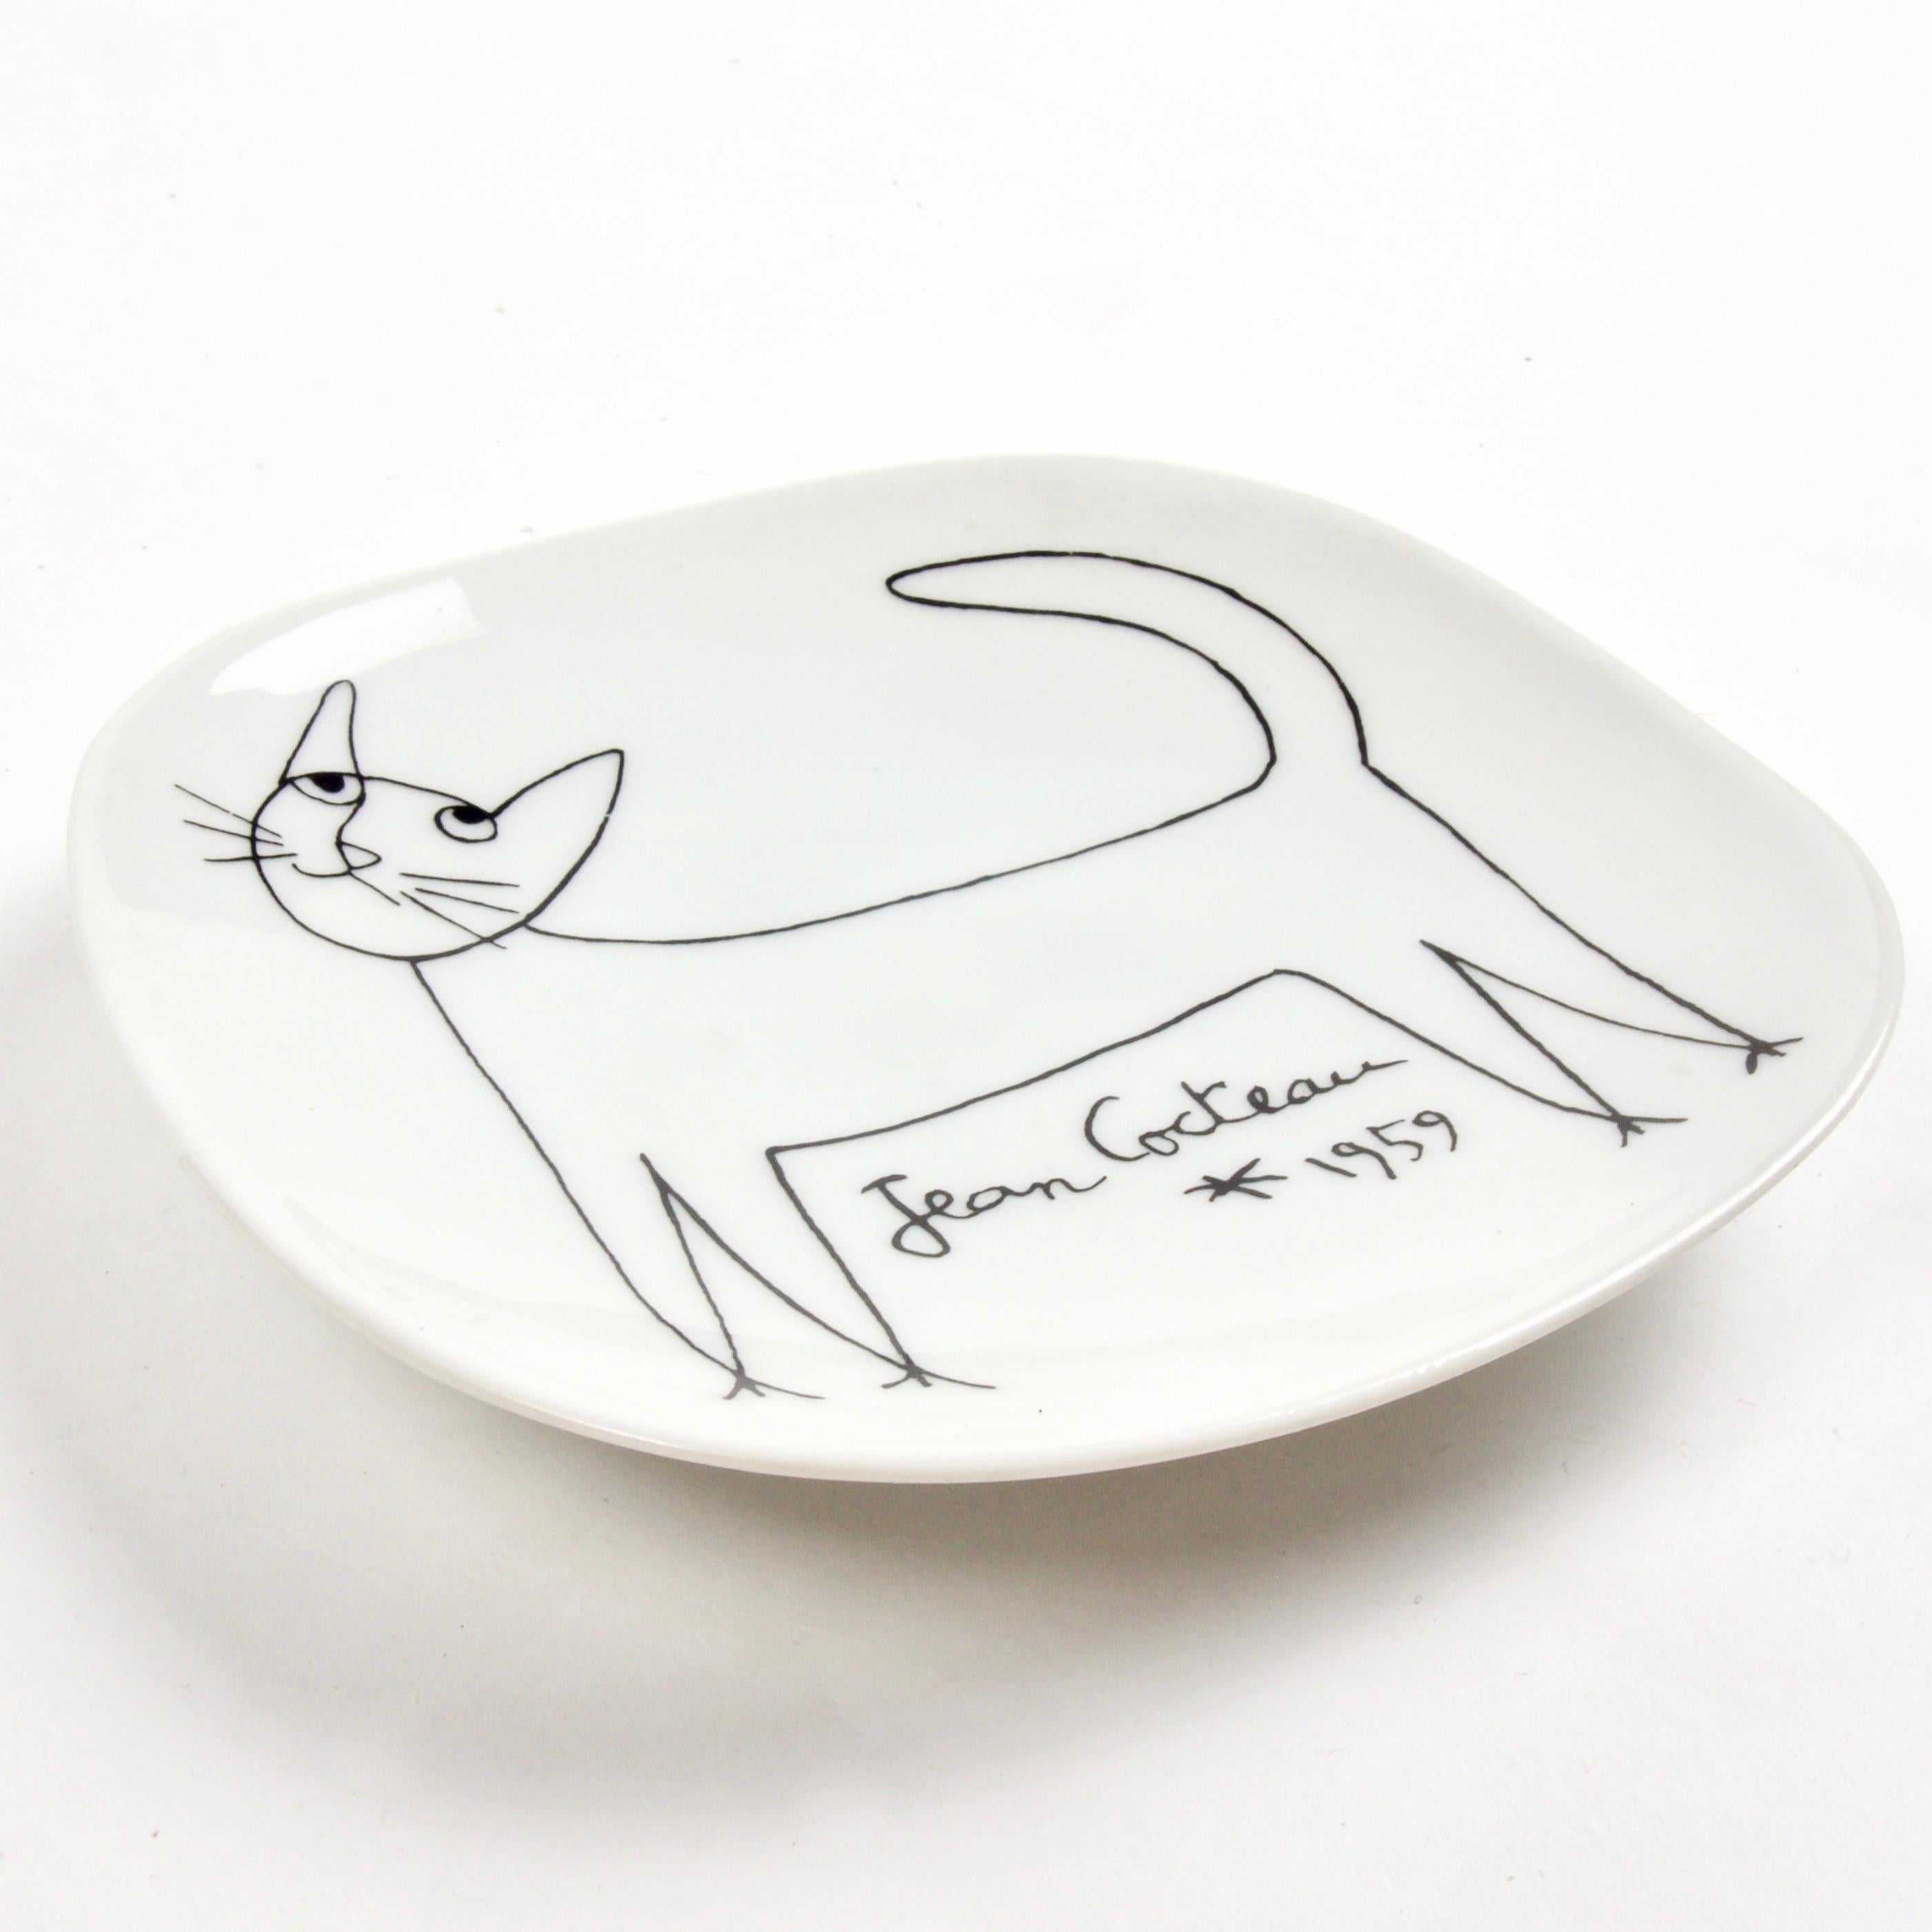 French Jean Cocteau Porcelain Dish for Limoges, 1959